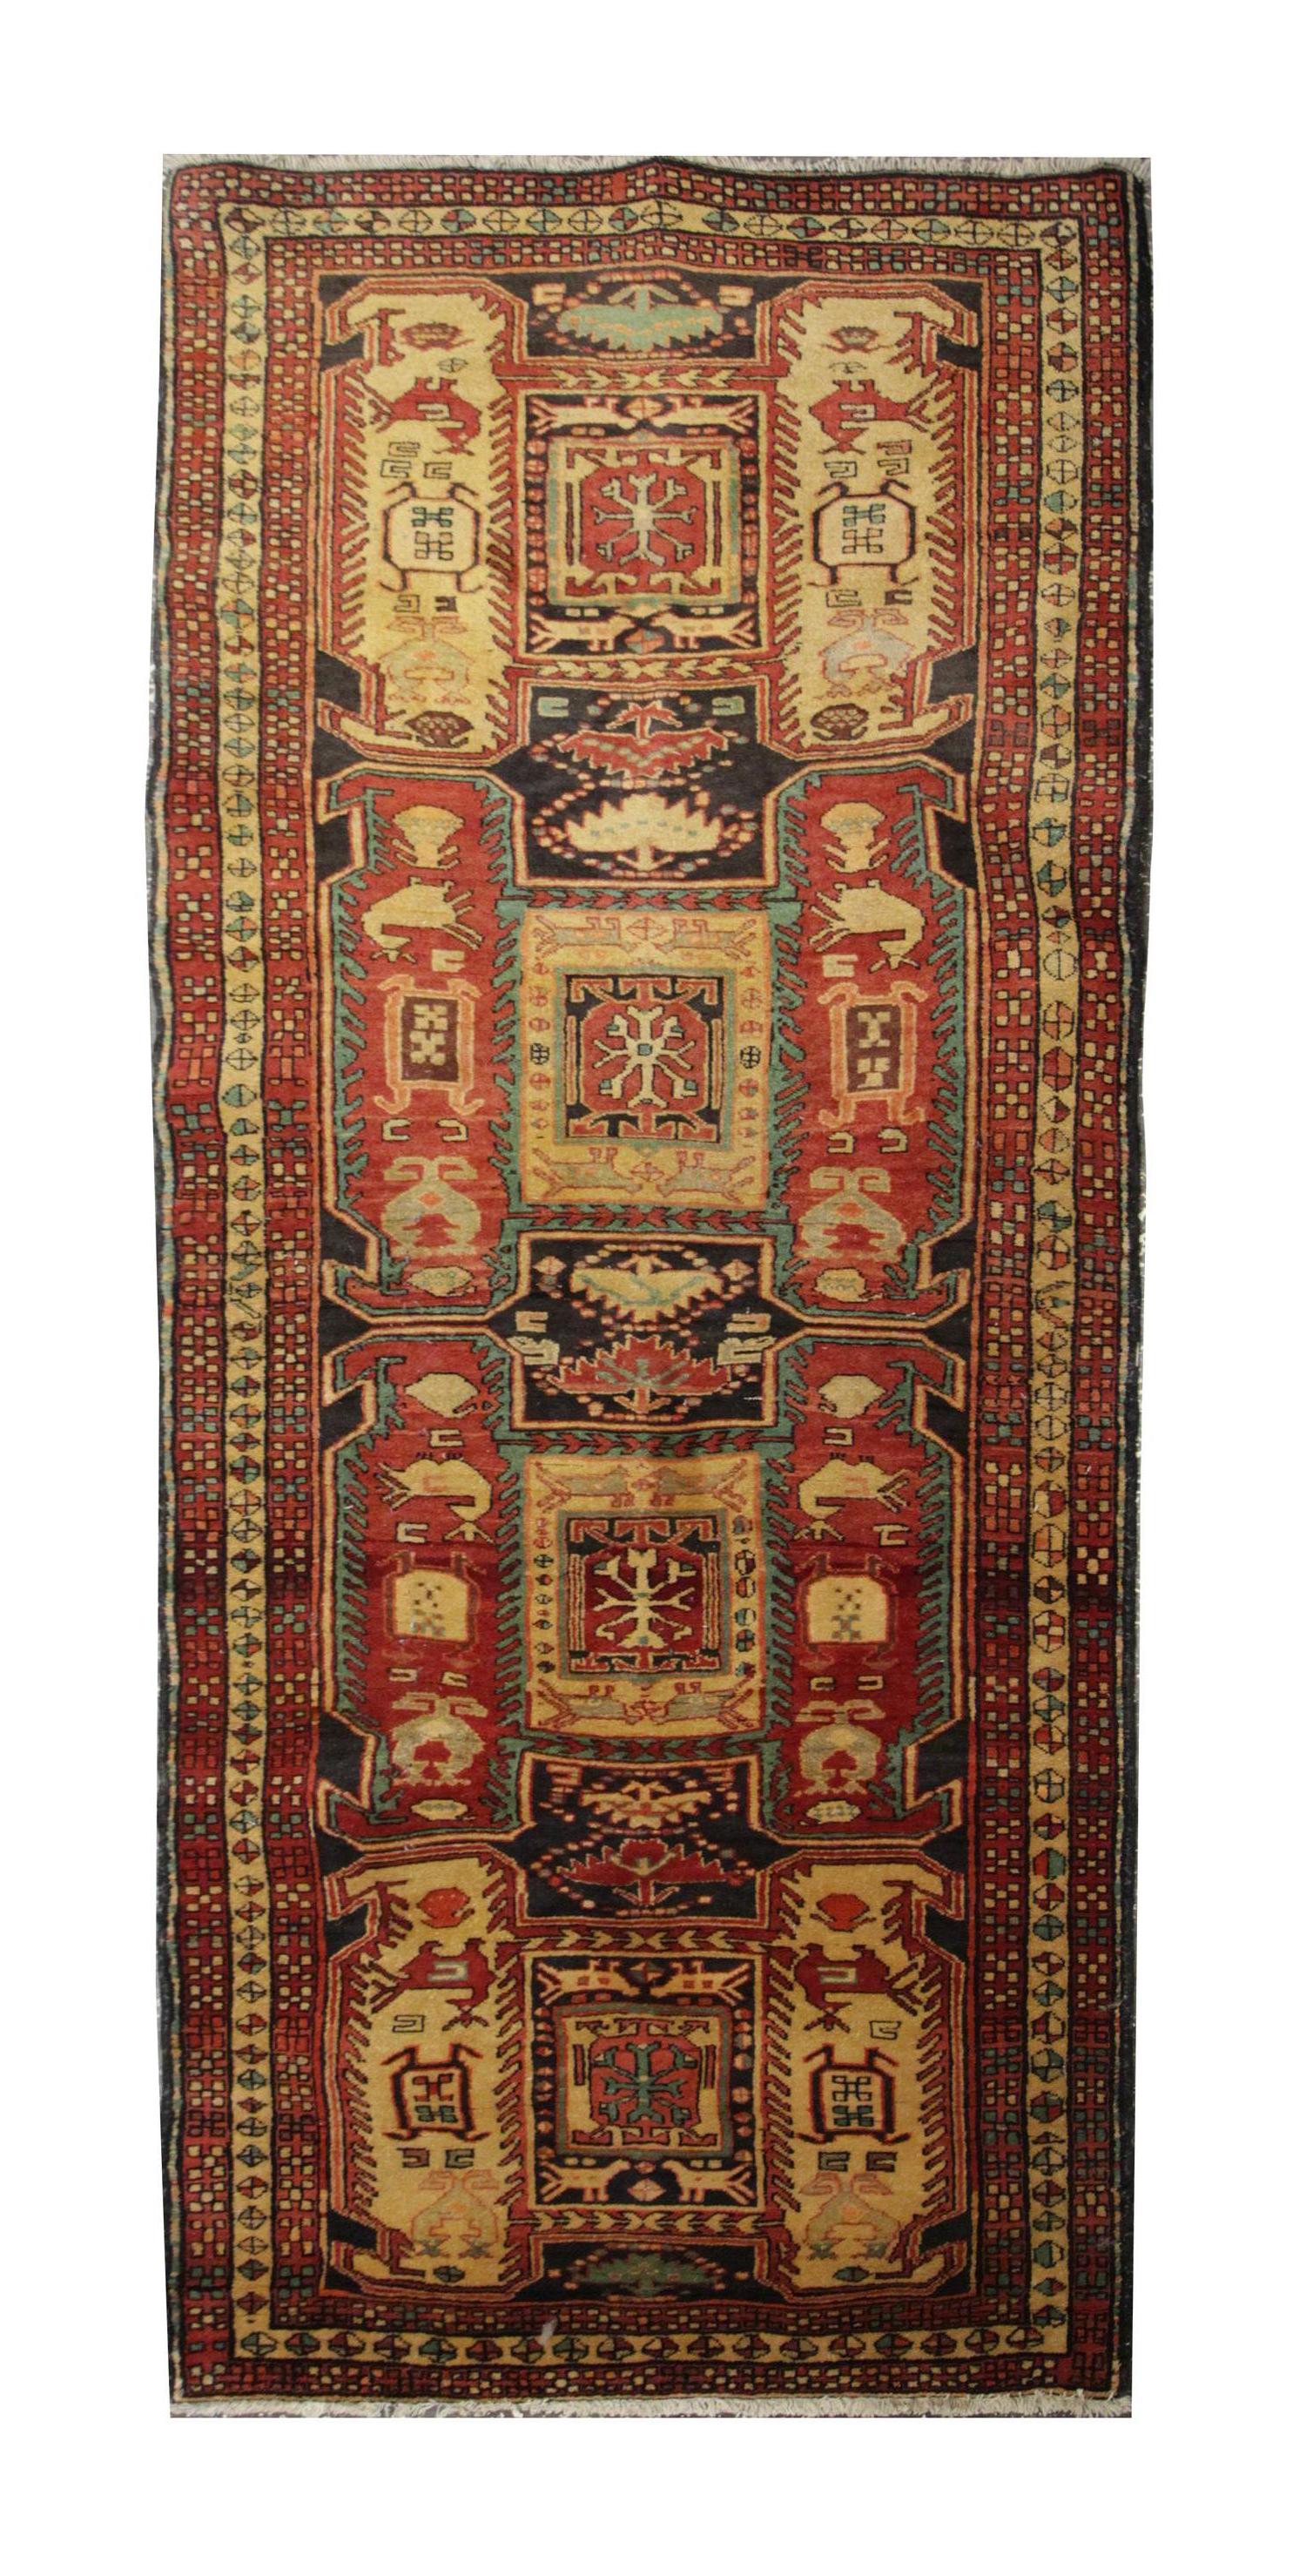 An excellent example of Caucasian carpet oriental rug weaving from the Kazak region of Azerbaijan. Though these Goldish-Brown ground all-over patterned rugs may seem like from a distance, this woven rug has a great range of rich organic vegetable